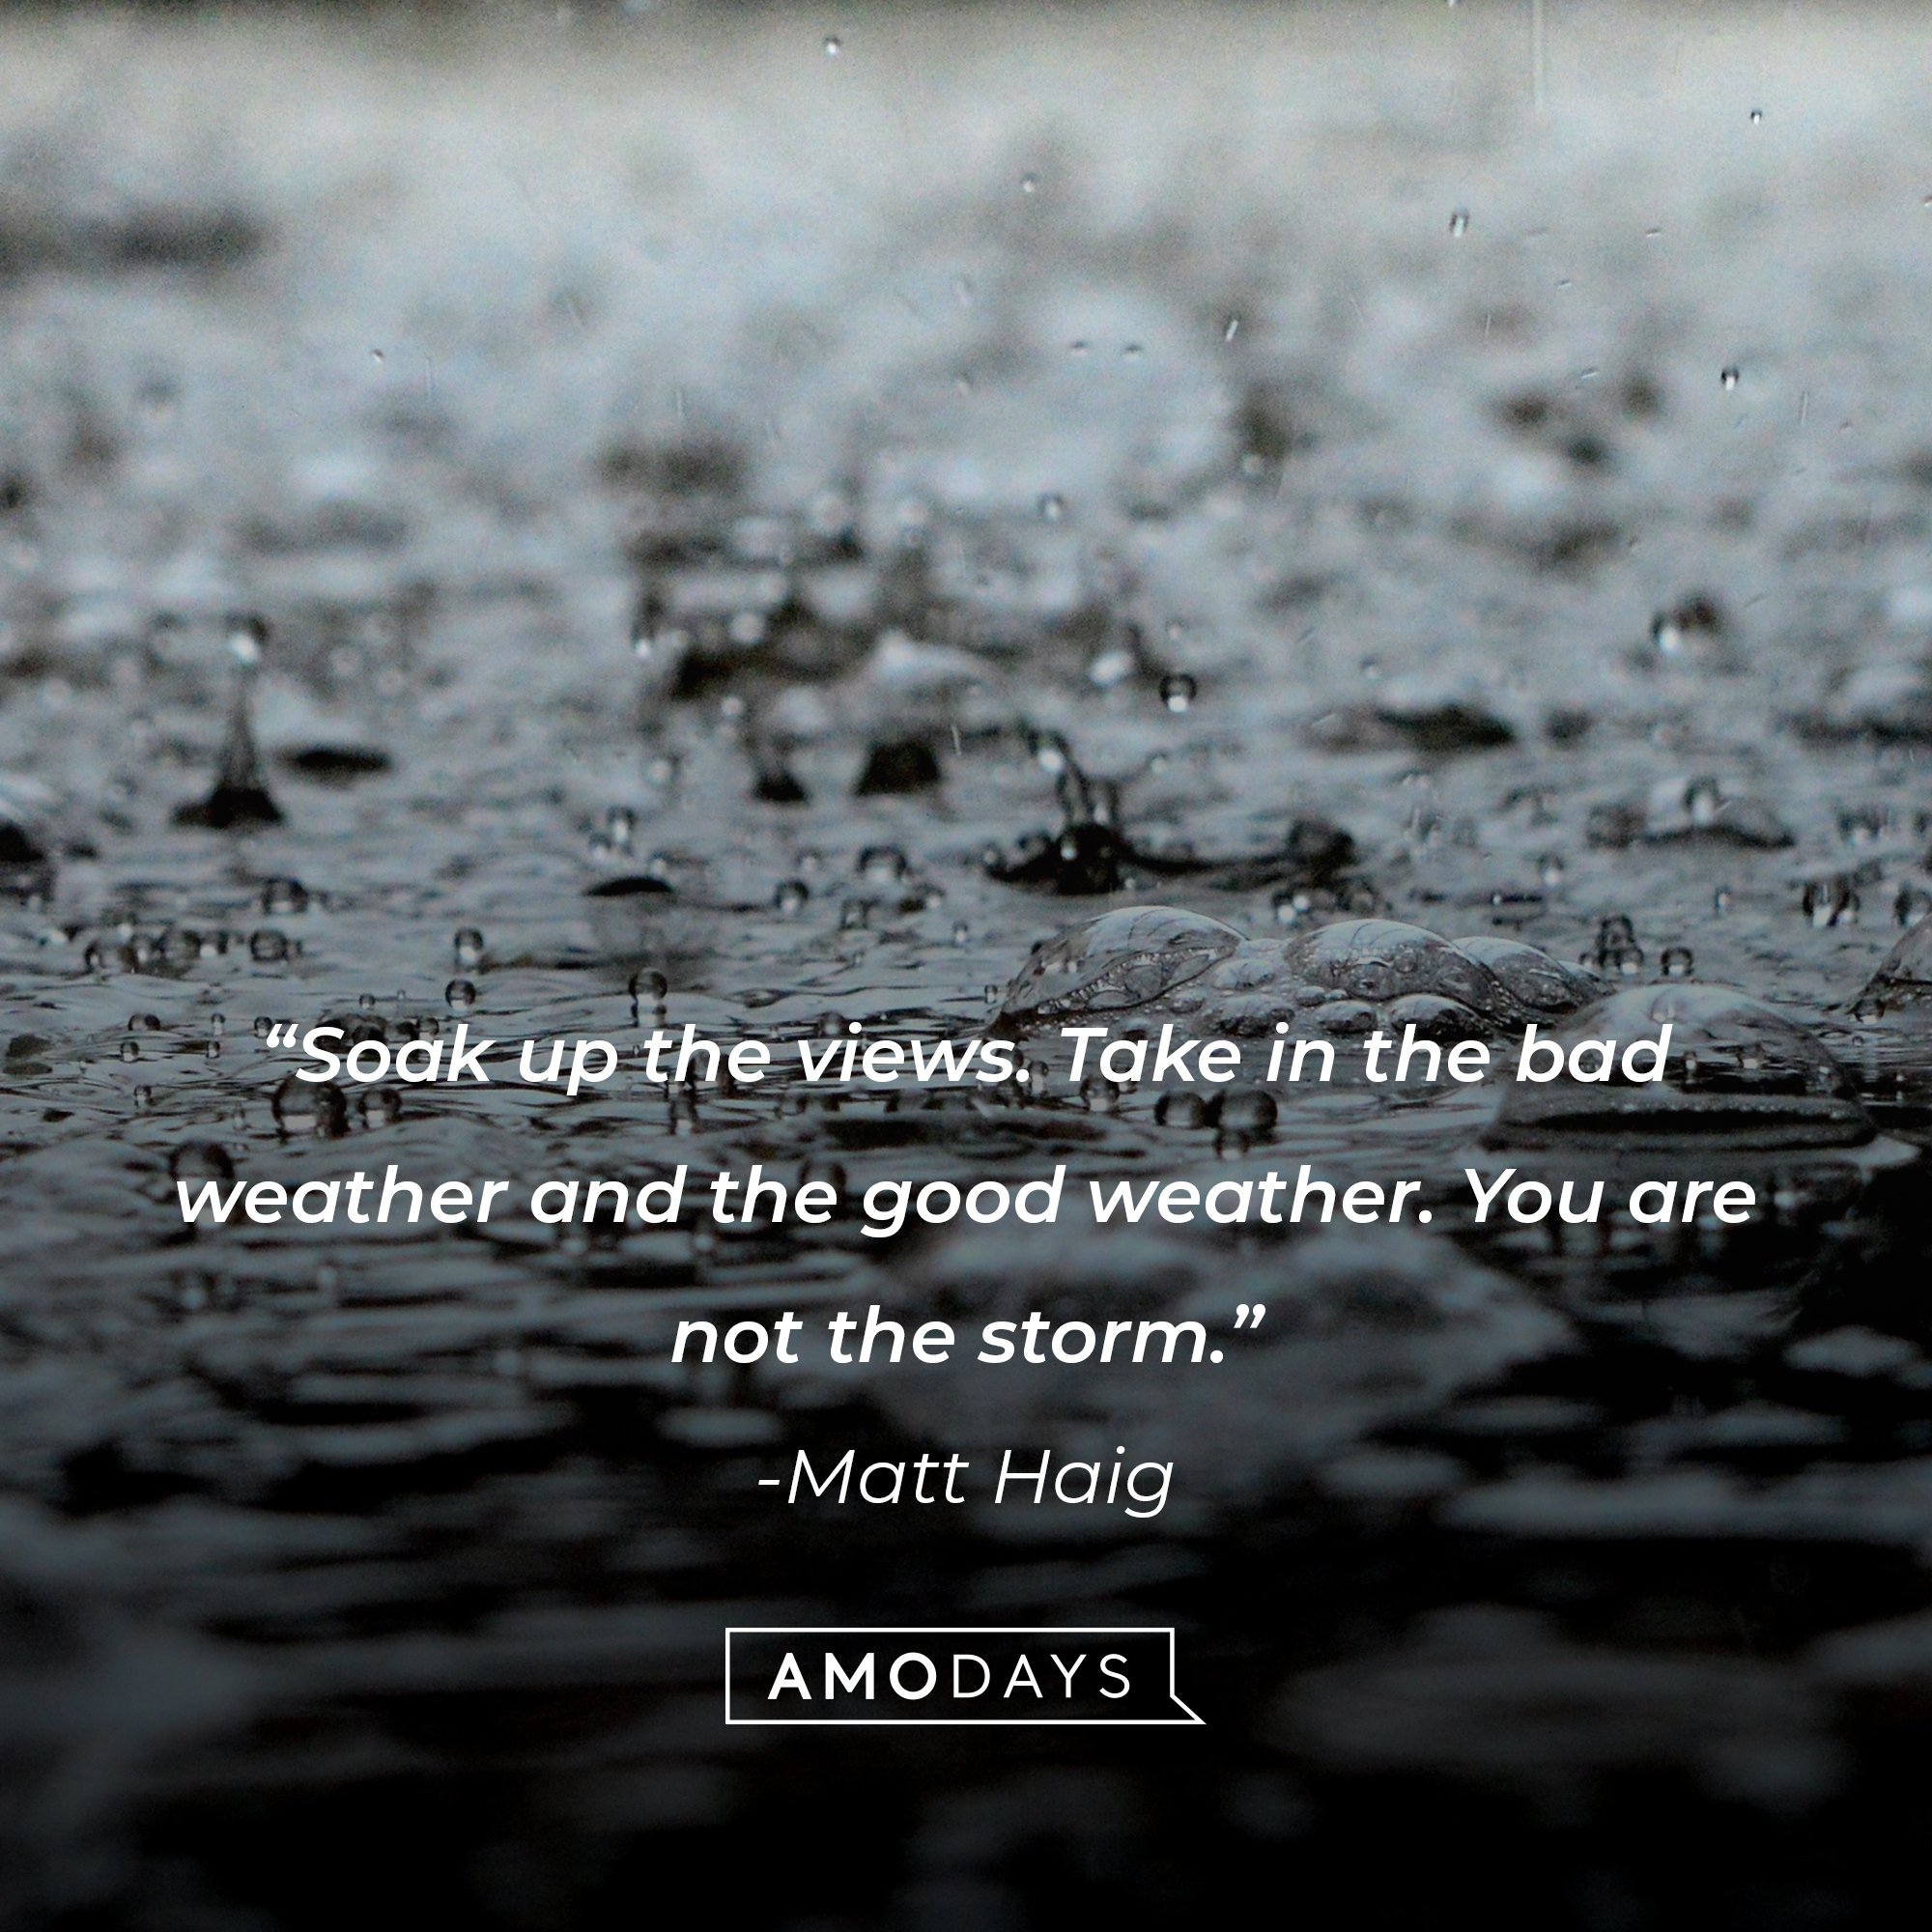 Matt Haig's quote: “Soak up the views. Take in the bad weather and the good weather. You are not the storm.” | Image: AmoDays